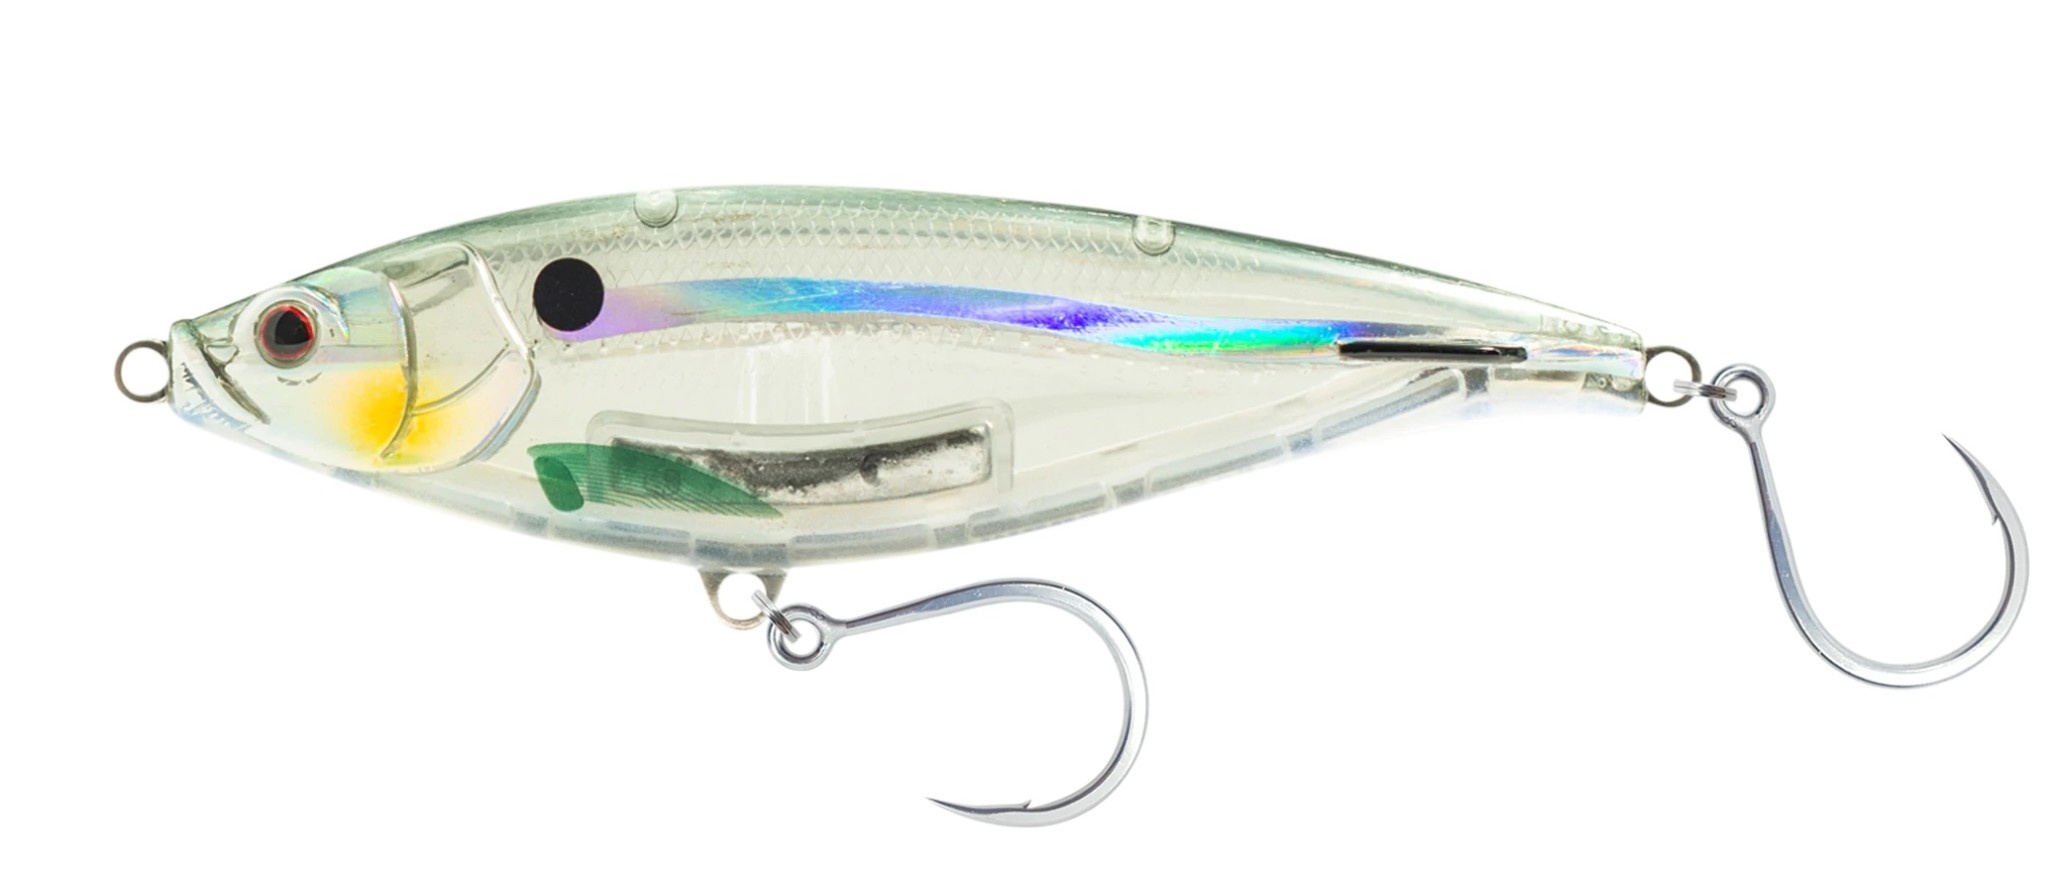 Nomad Design - Madscad 150 Sinking (6in) Holo Ghost Shad